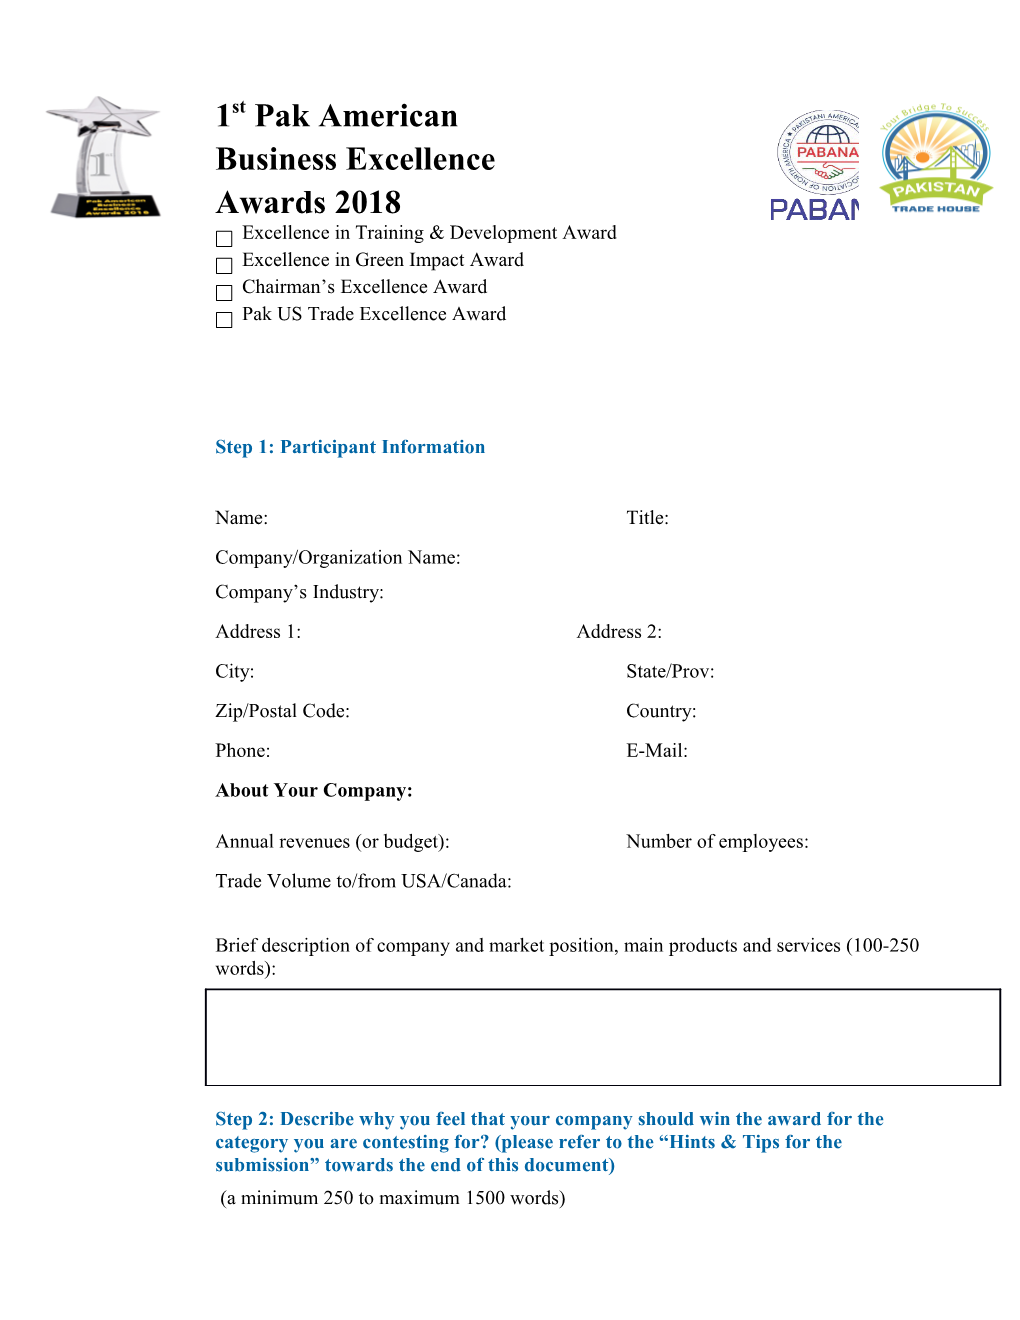 This Form Must Be Completed by All Entrants, Regardless of Award Category Selection